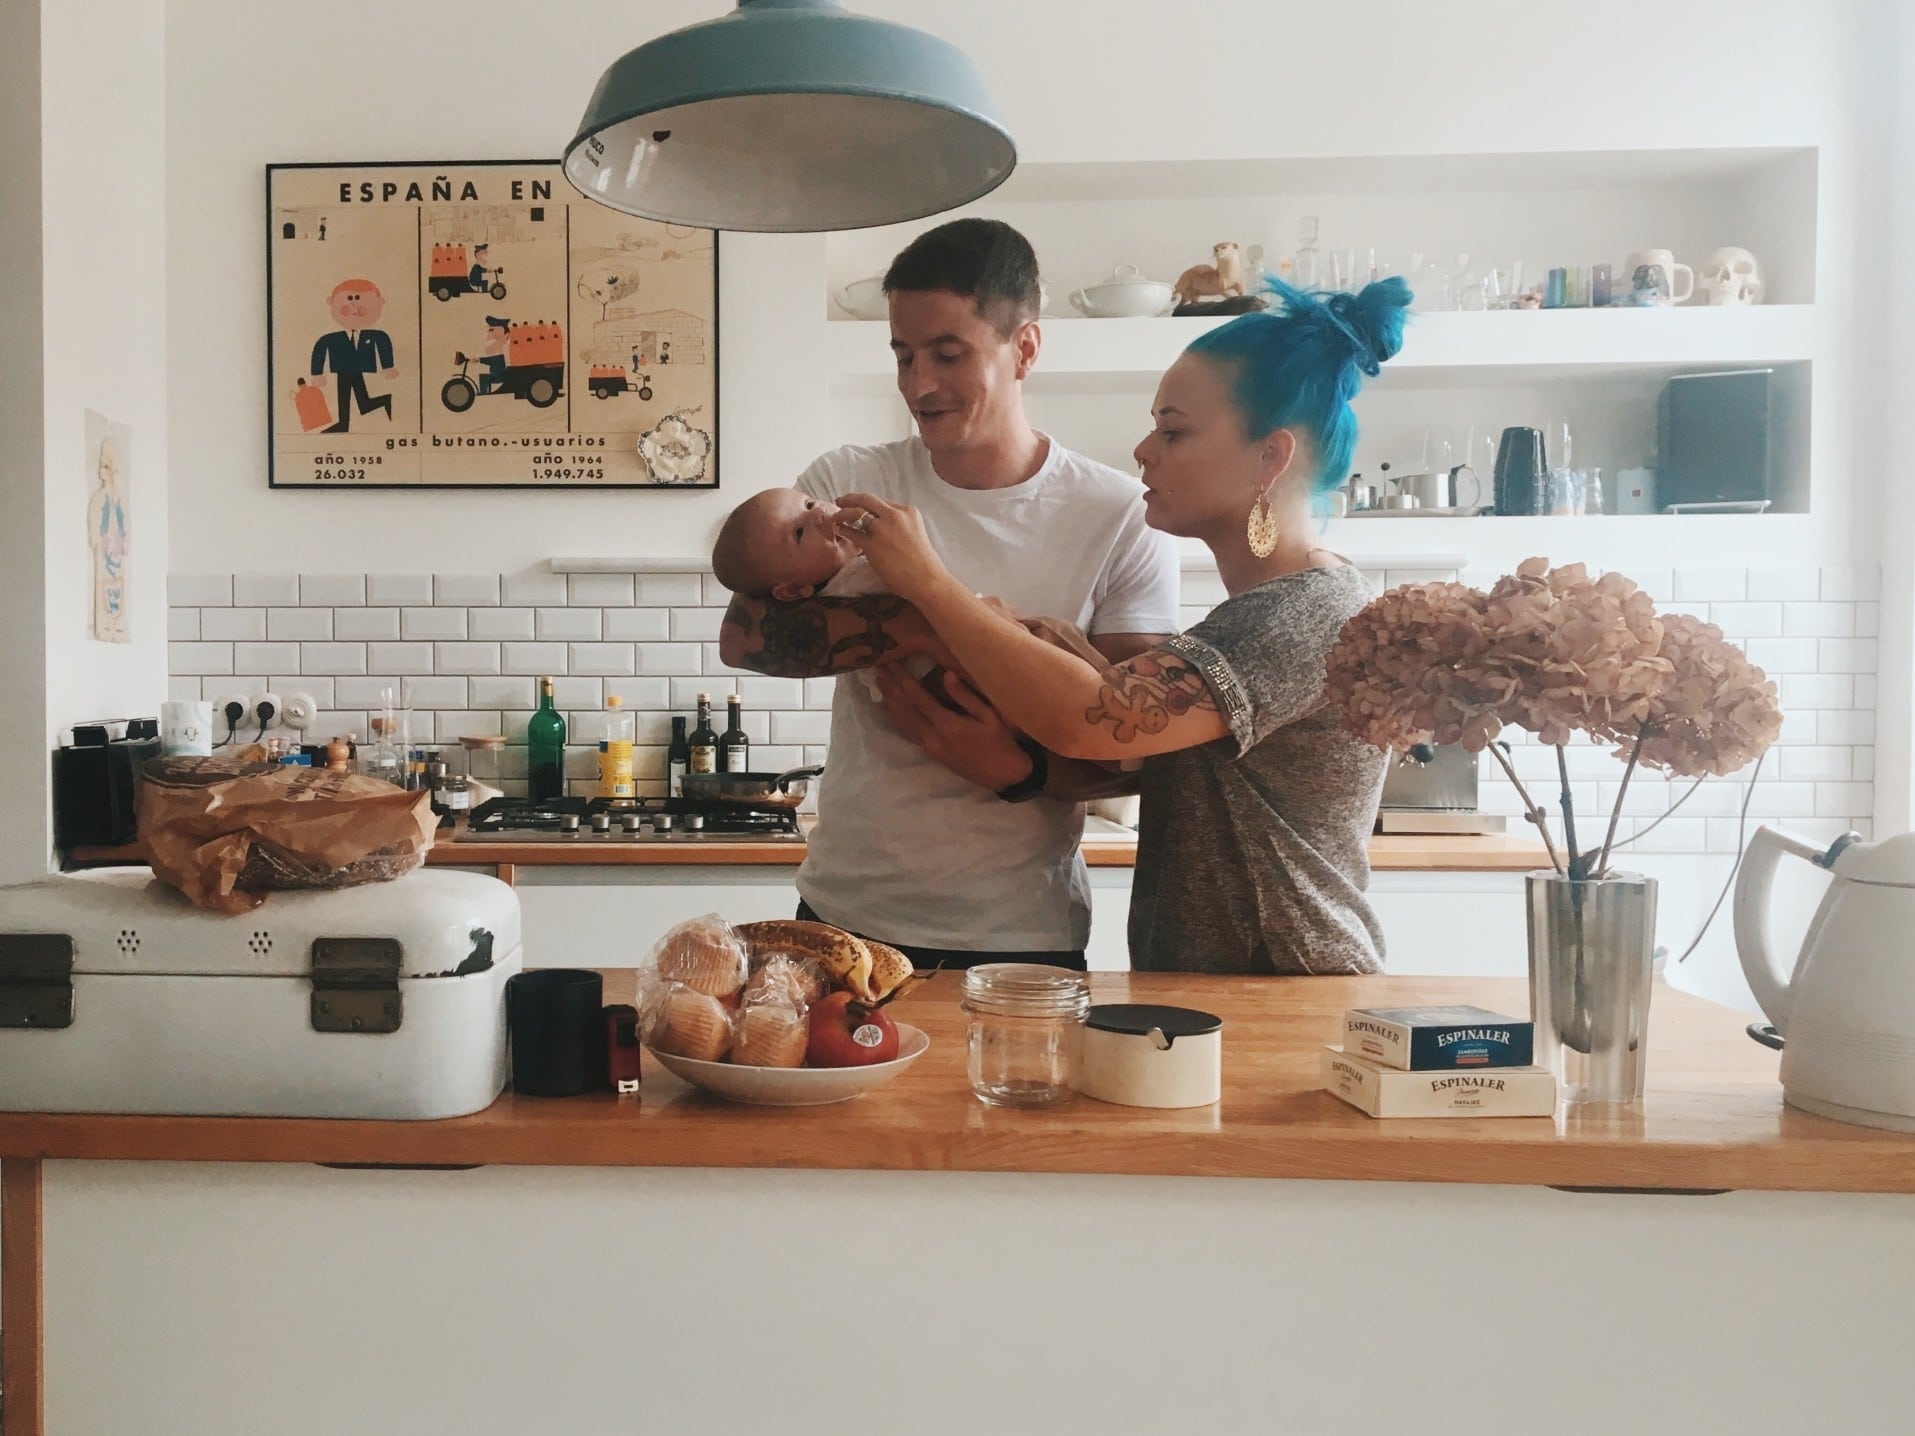 parents looking over a newborn baby standing in their kitchen